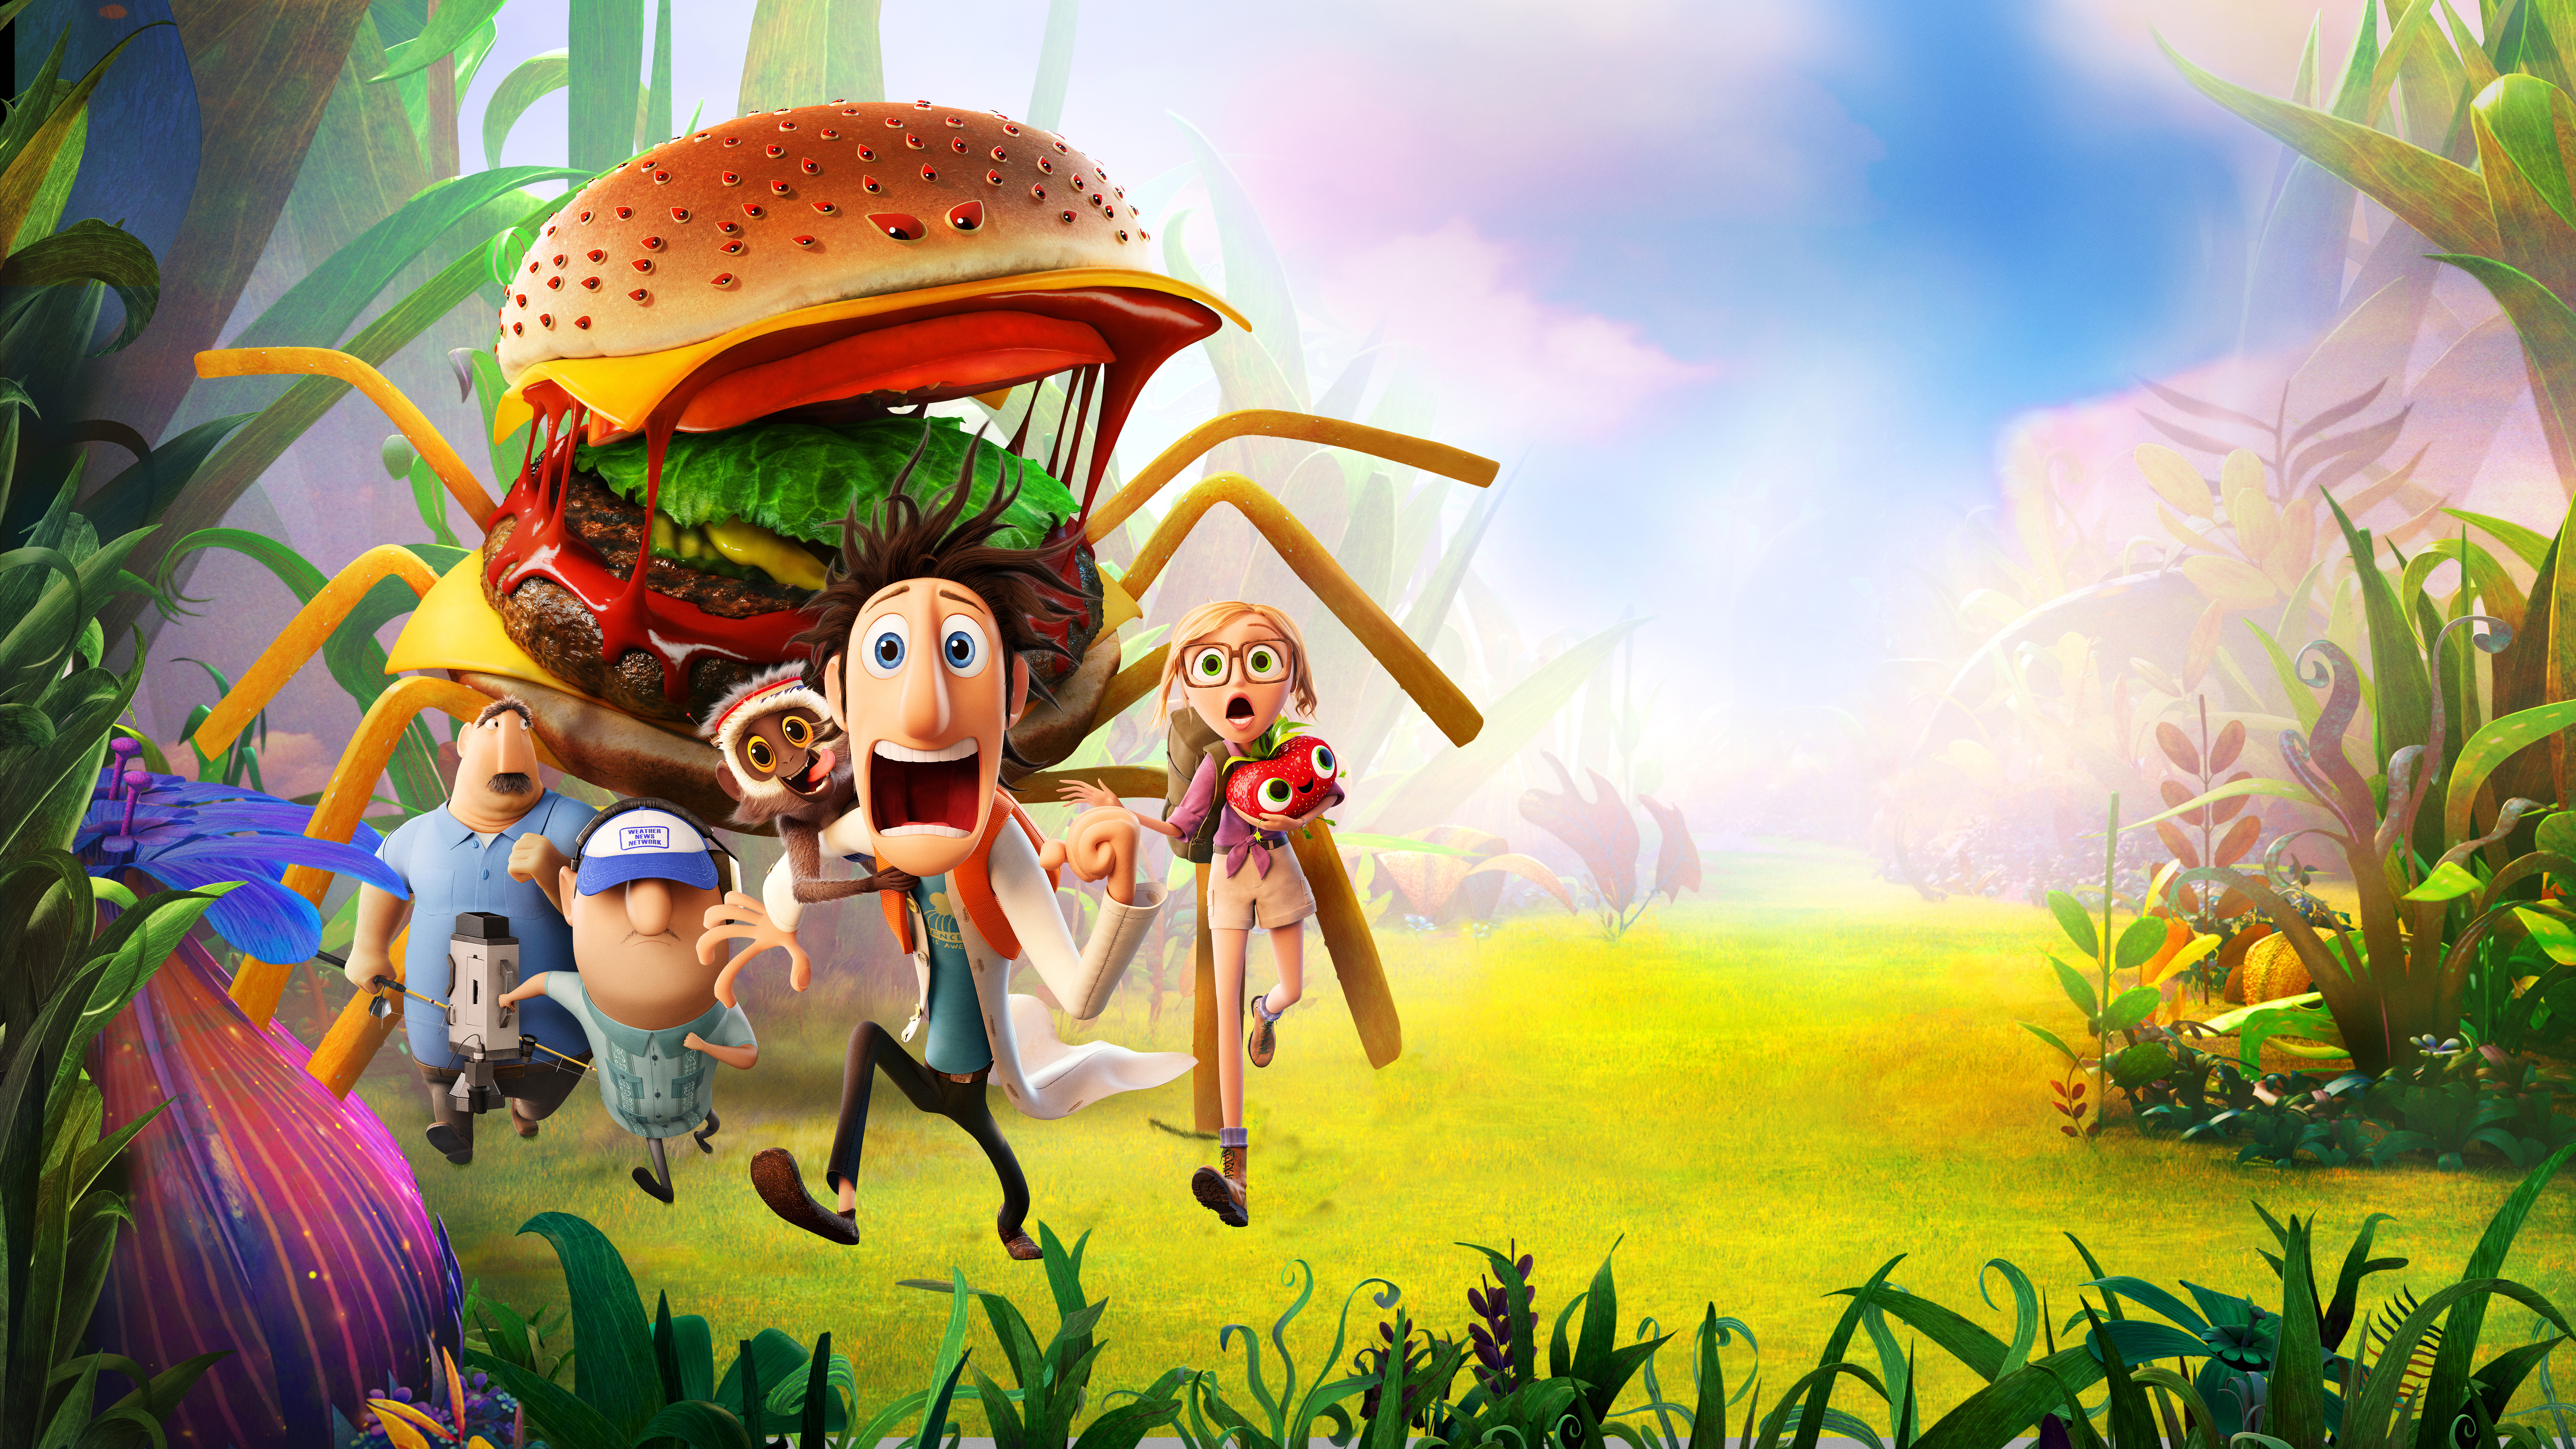 Movie Cloudy with a Chance of Meatballs 2 8k Ultra HD Wallpaper